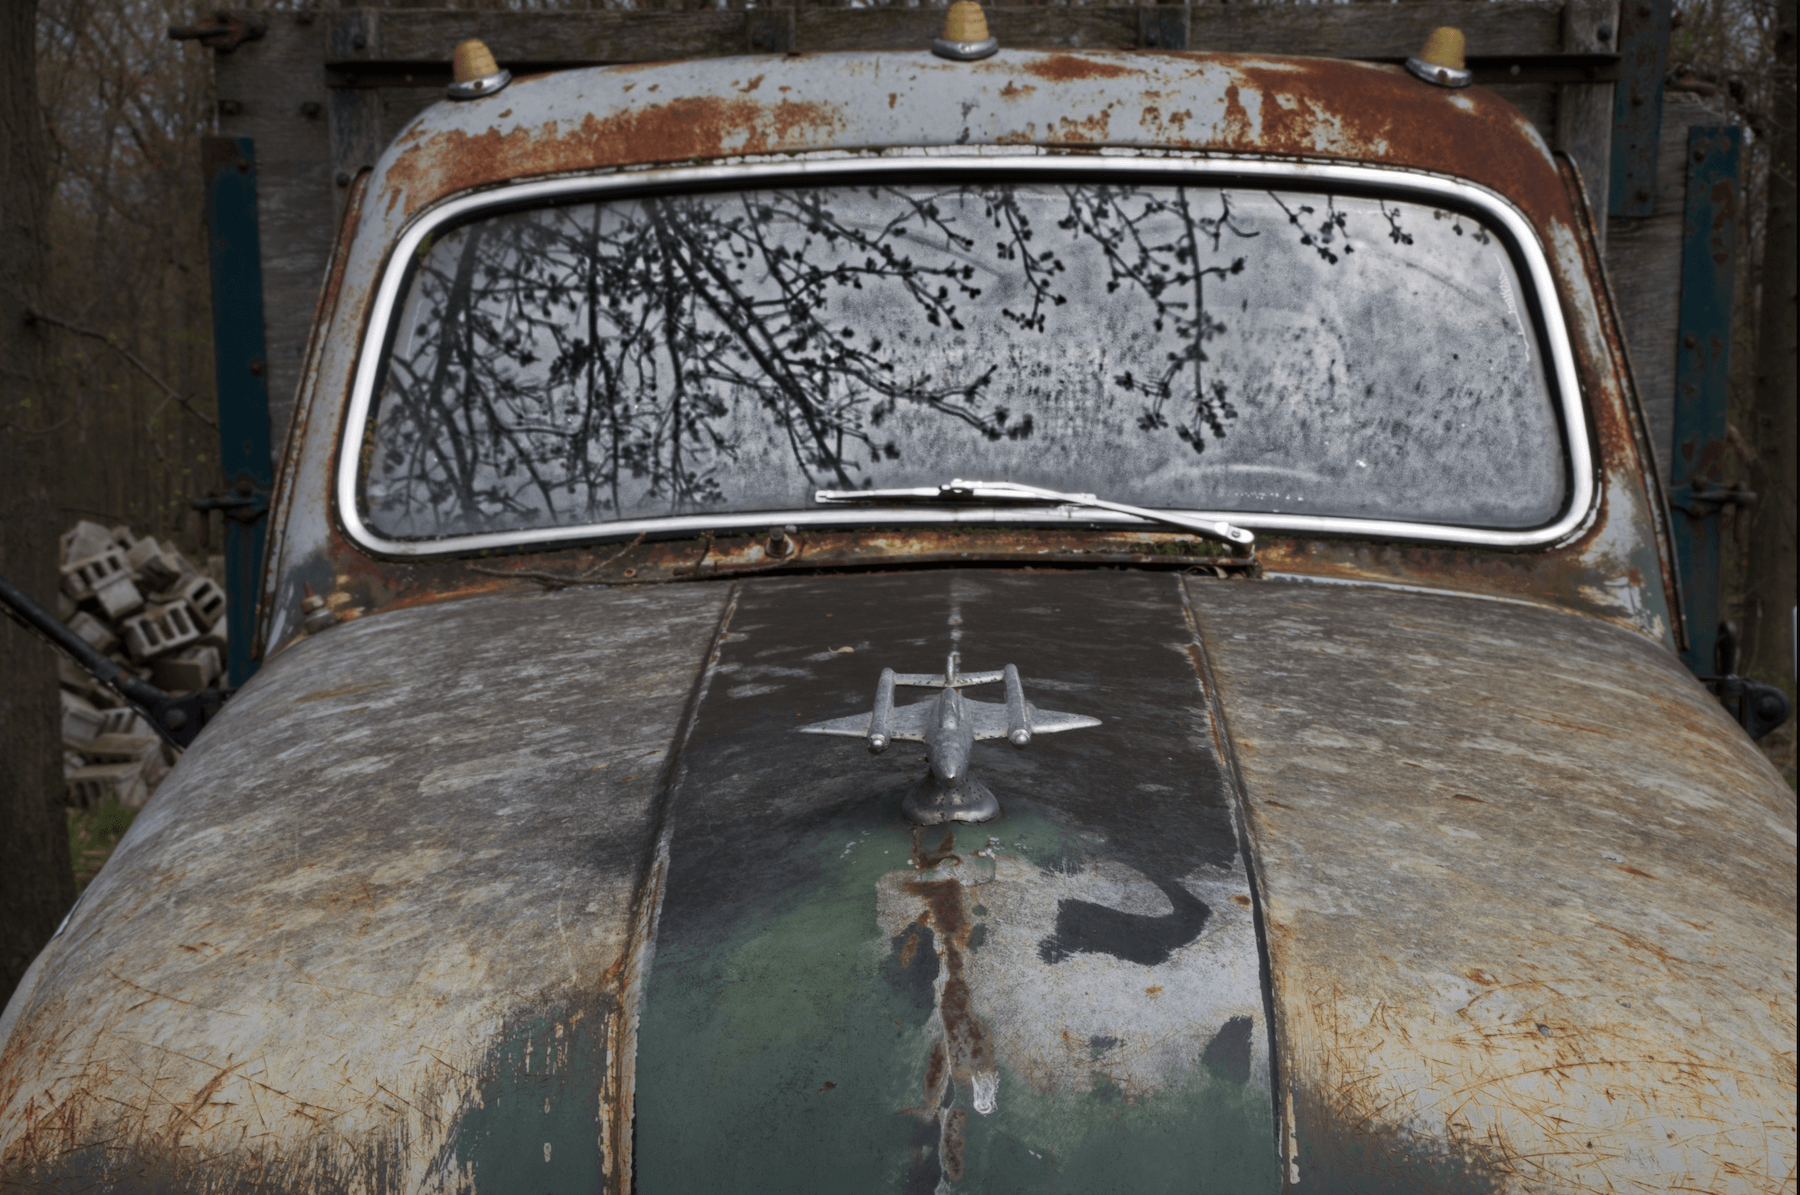 a close up of an abandoned 1 ton truck with crazy reflection on the windshield.